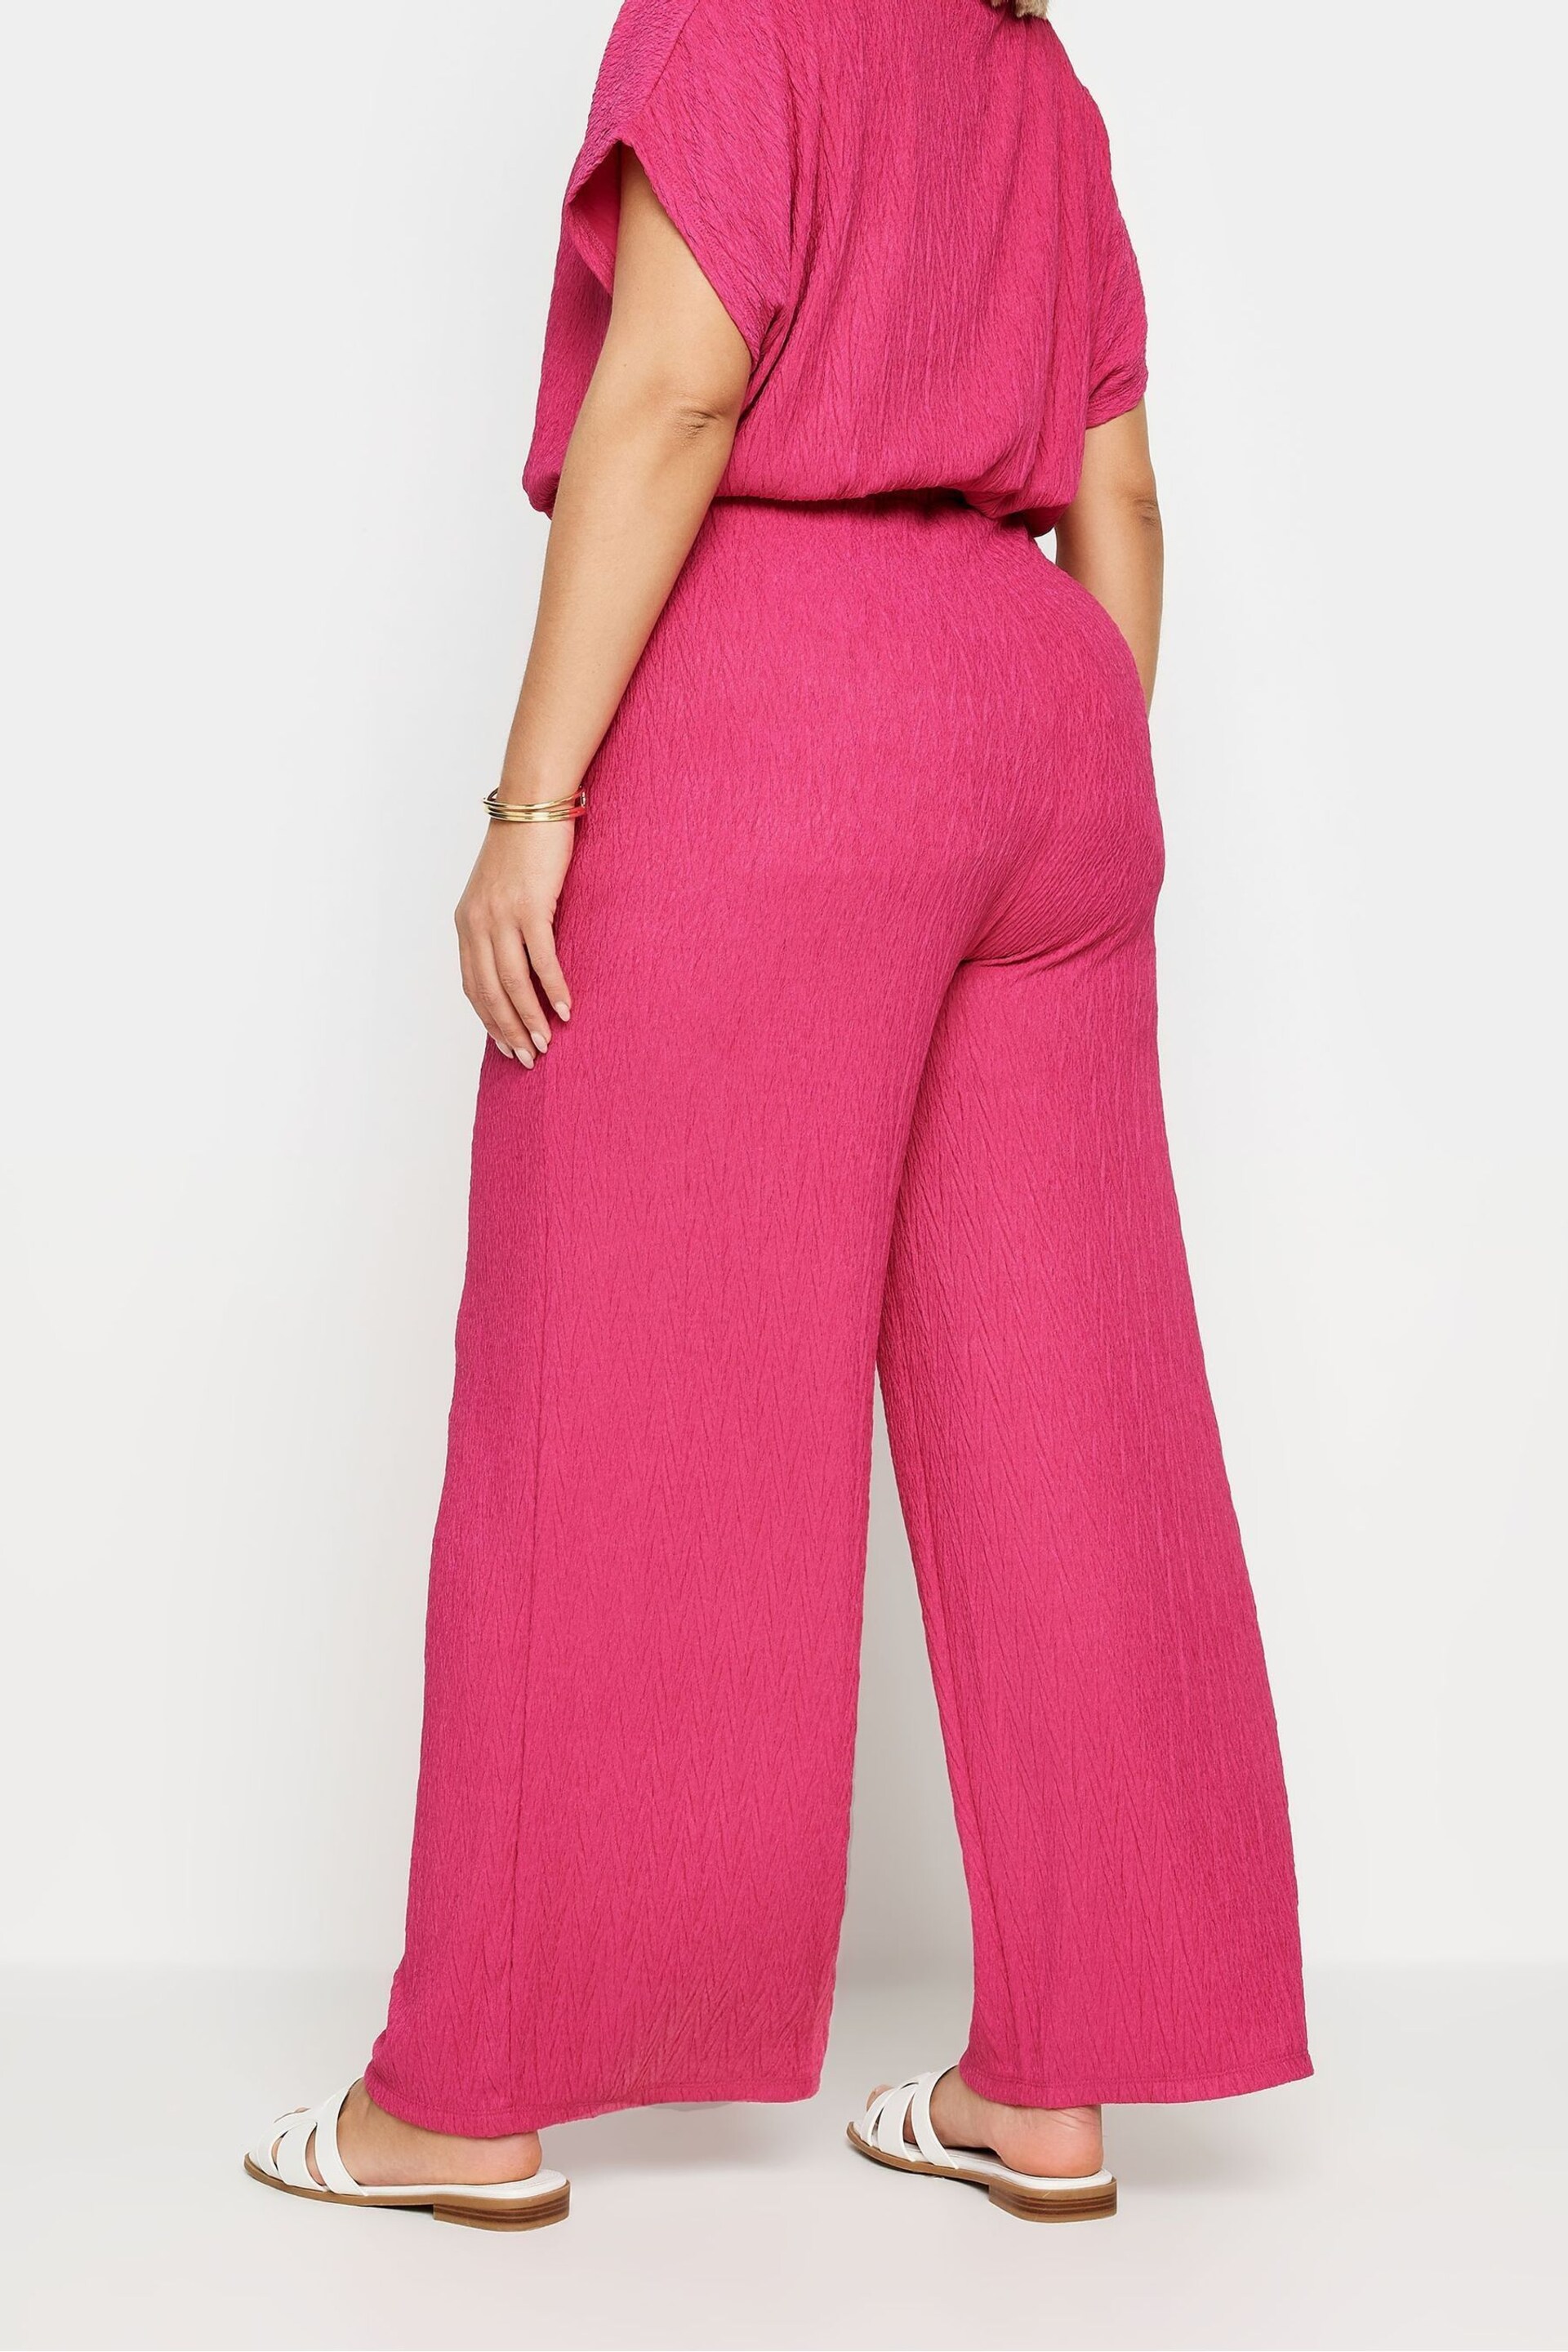 Yours Curve Pink Crinkle Plisse Trousers - Image 3 of 6